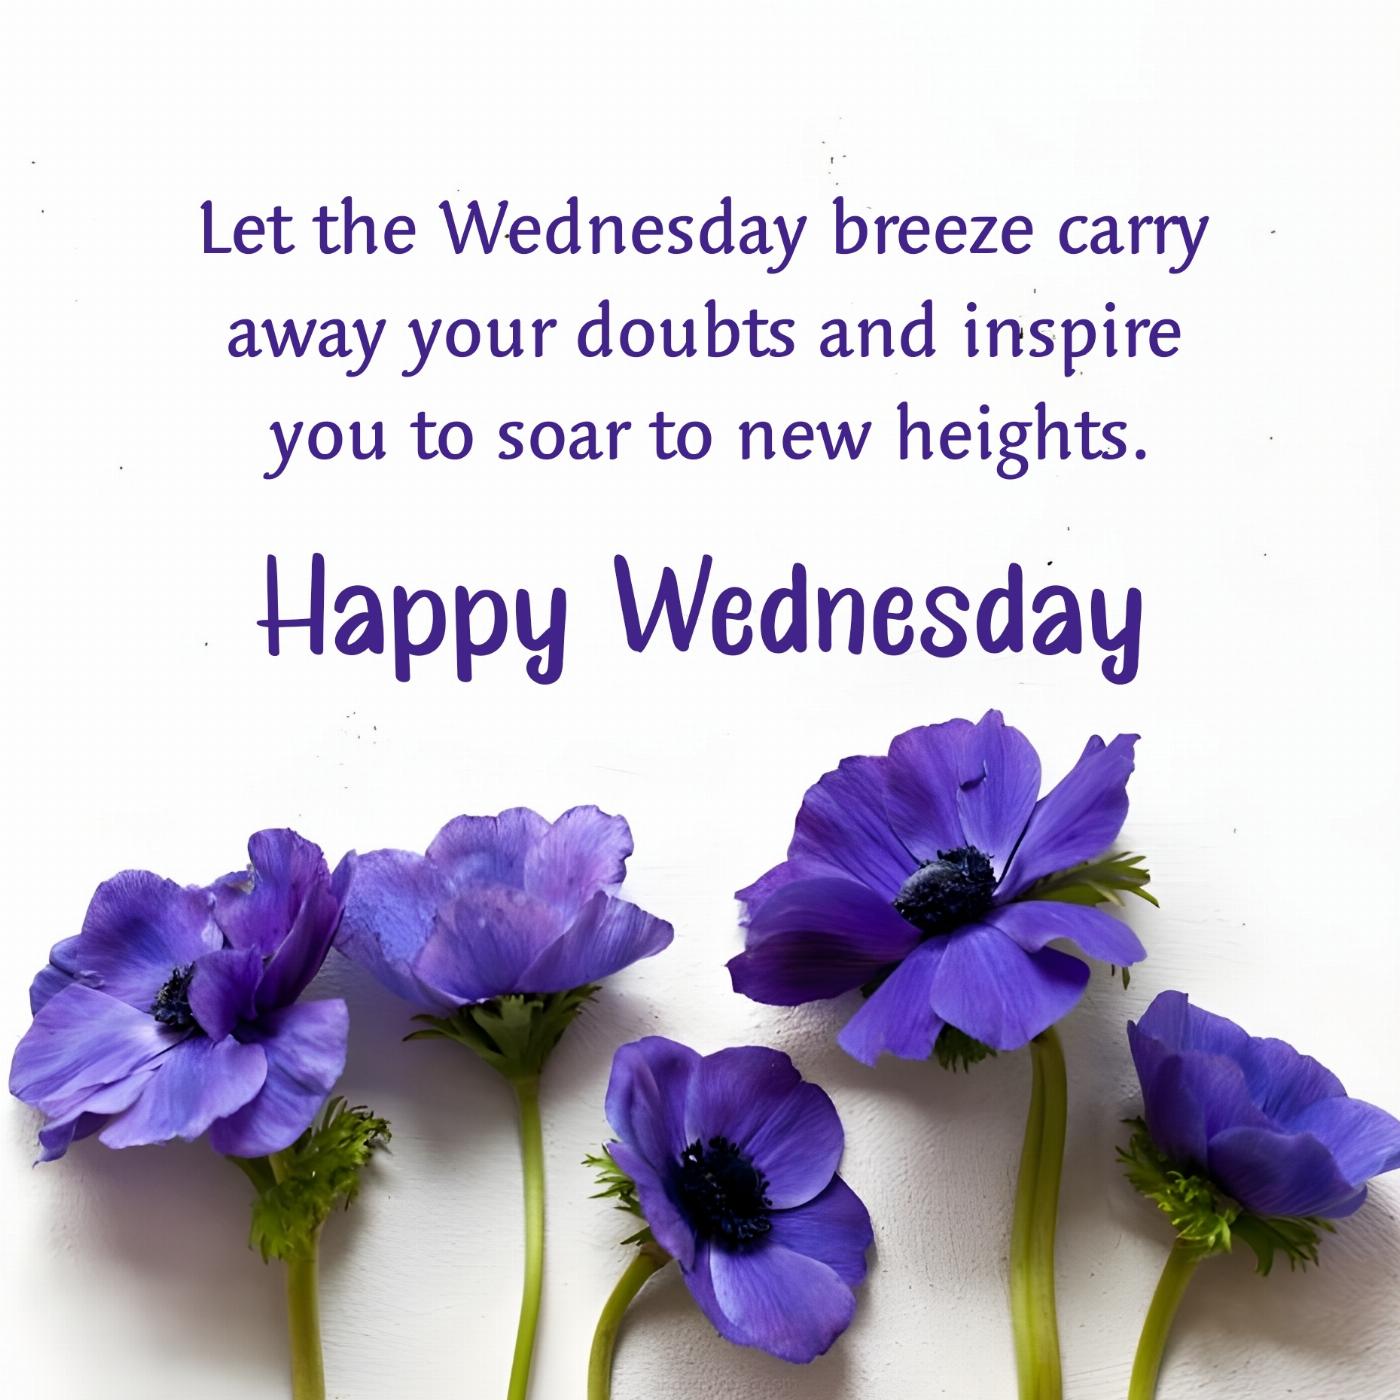 Let the Wednesday breeze carry away your doubts and inspire you